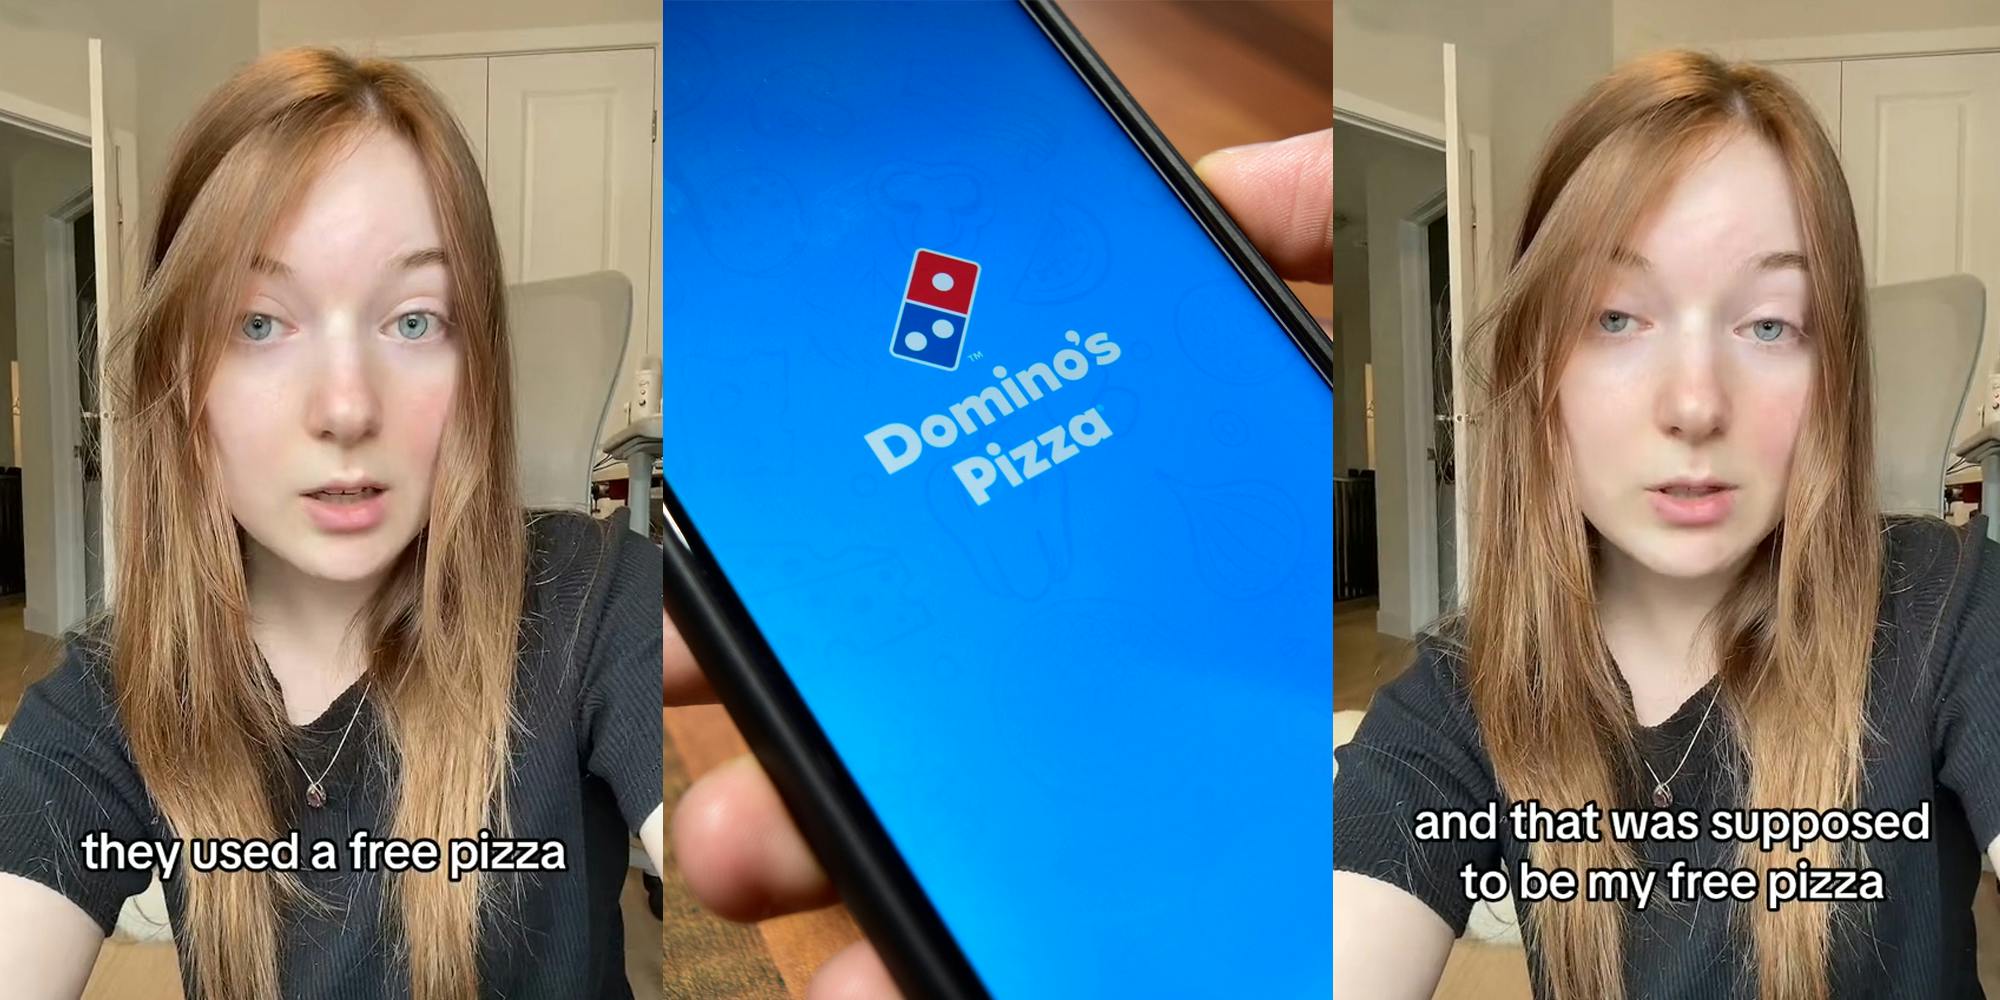 Domino's customer speaking with caption "they used a free pizza" (l) Domino's app on phone screen in hand (c) Domino's customer speaking with caption "and that was supposed to be my free pizza" (r)